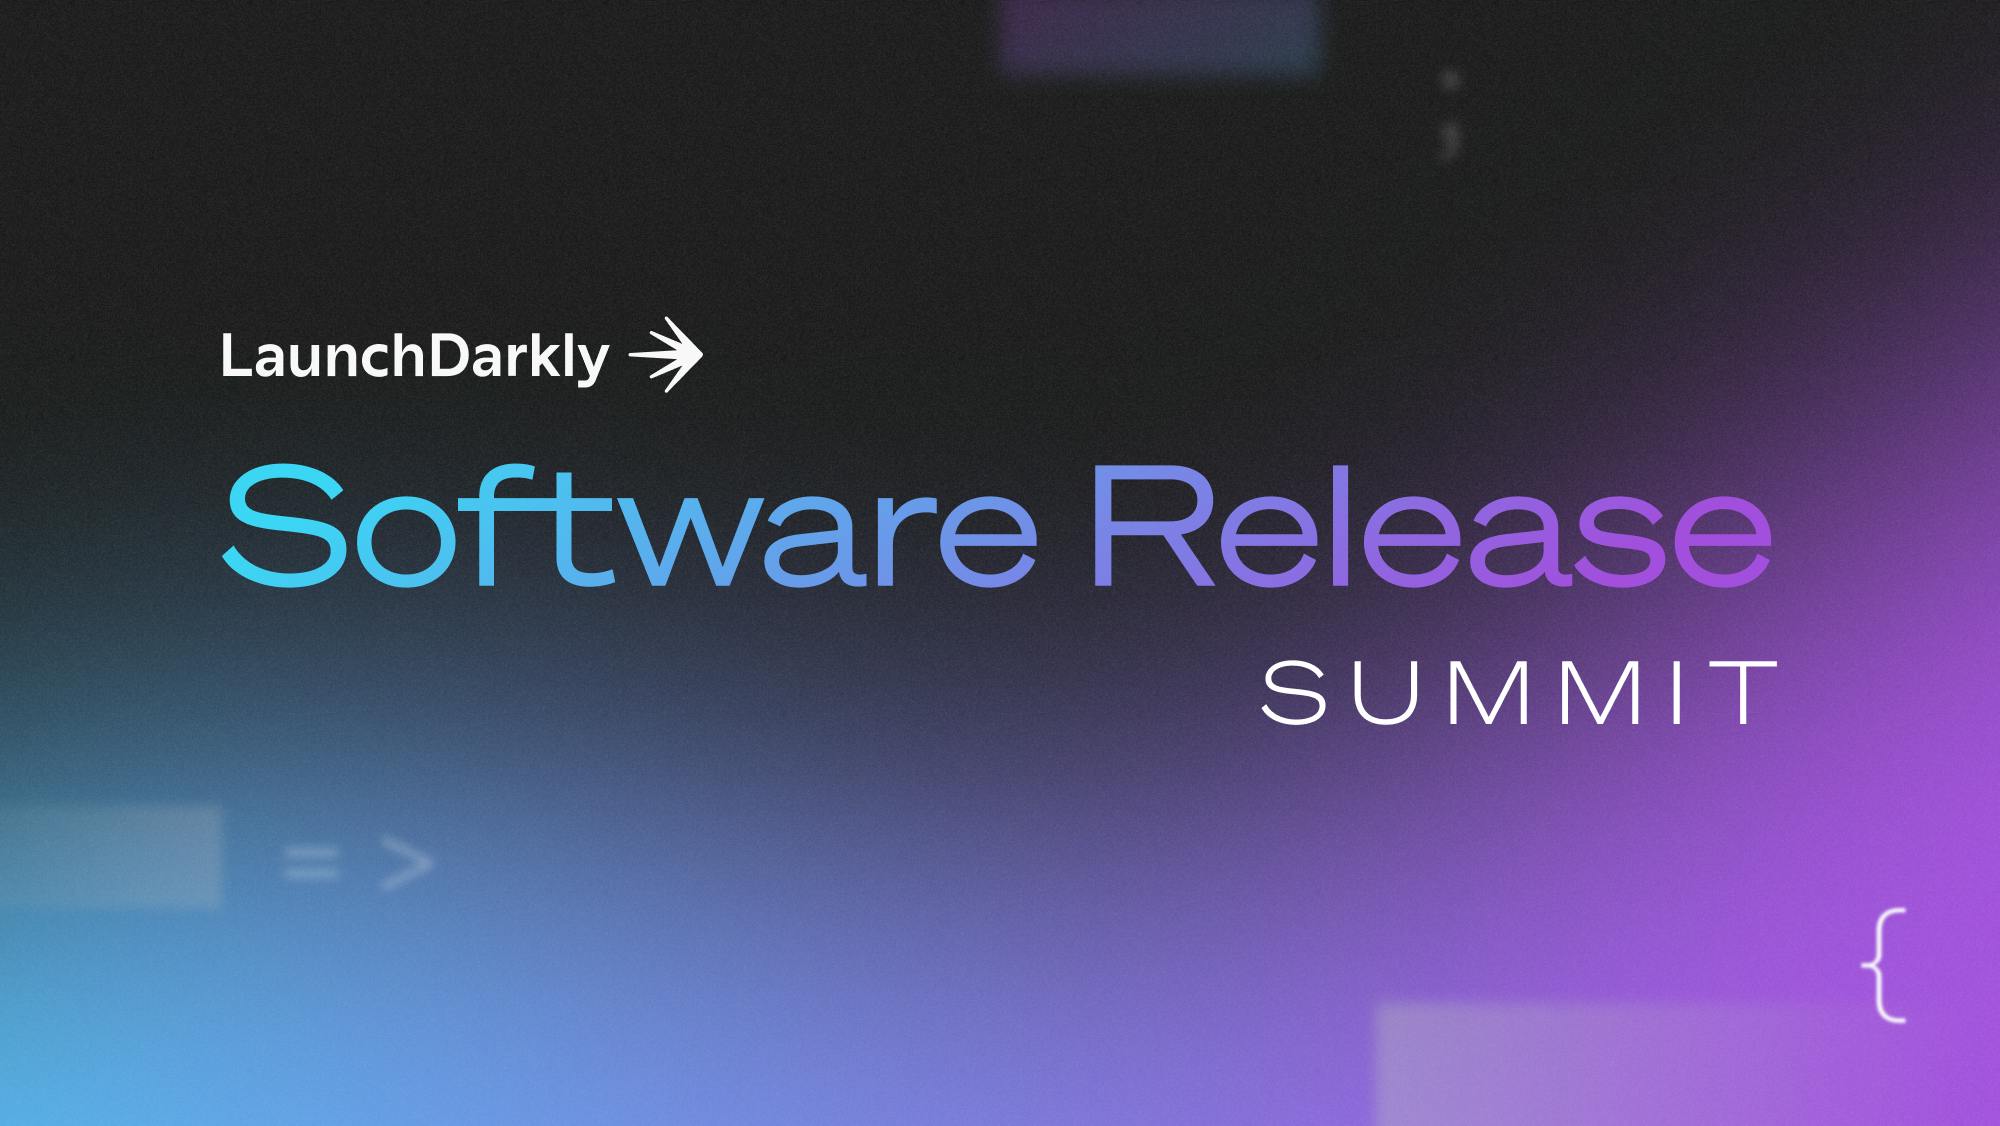 5 Reasons to Attend the Software Release Summit featured image